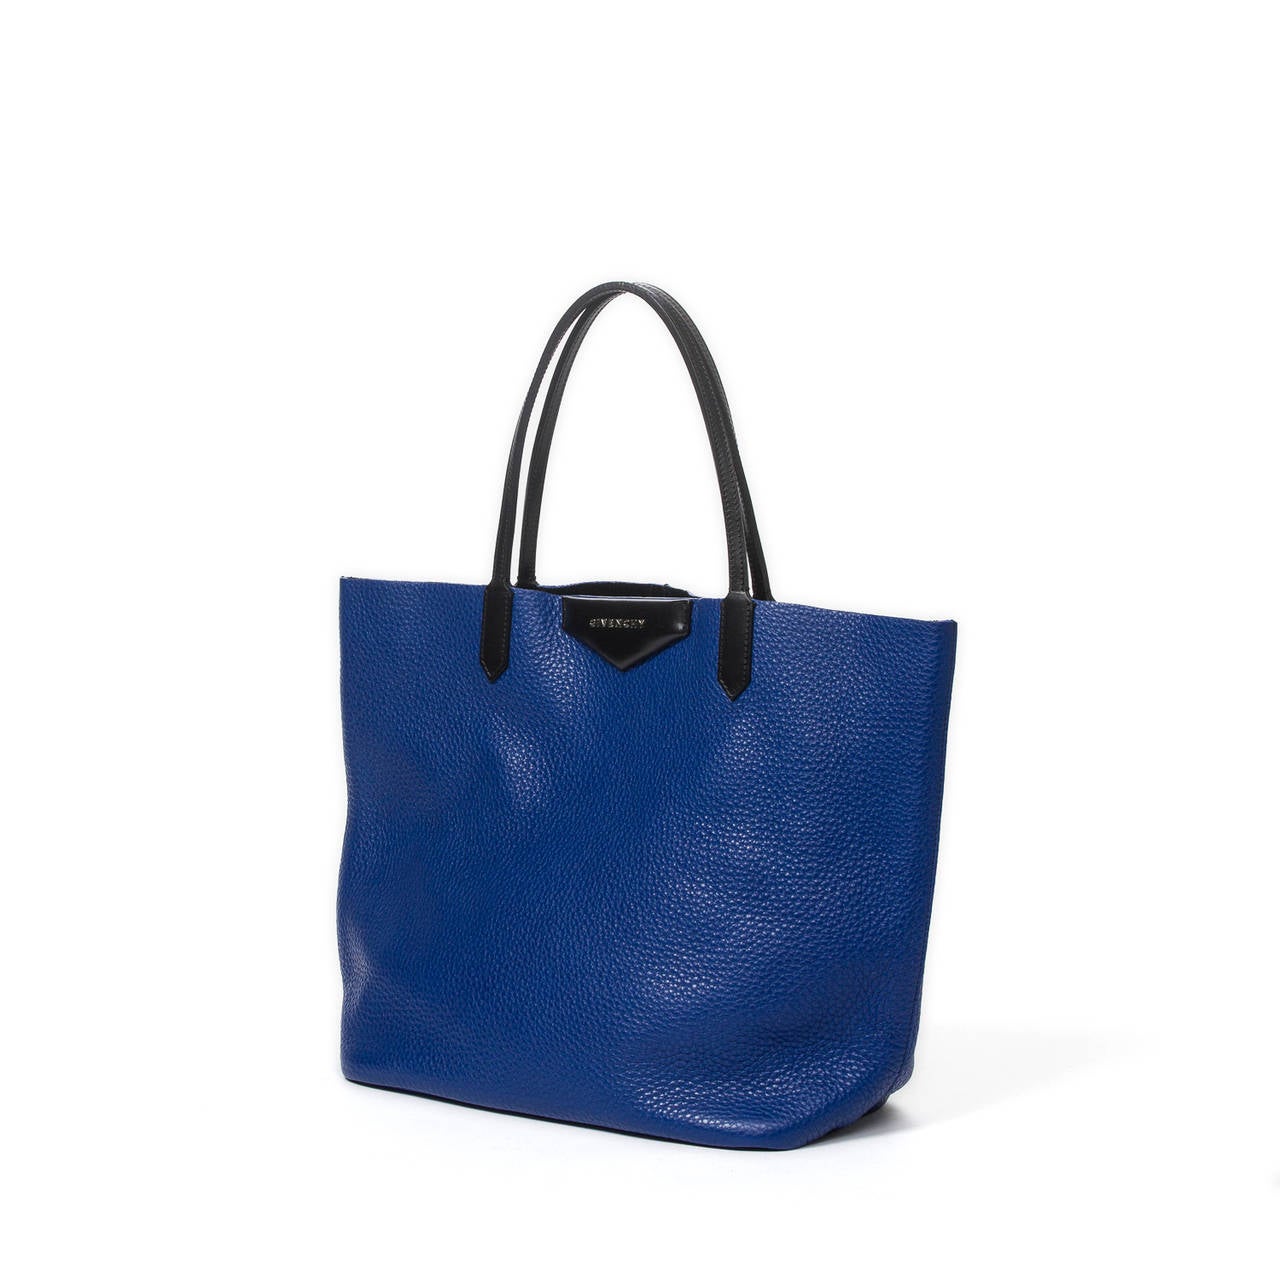 Tote bag in electric blue grained leather with black straps. Black coated leather interior with blue electric leather pouch. Dustbag included. Mint condition.